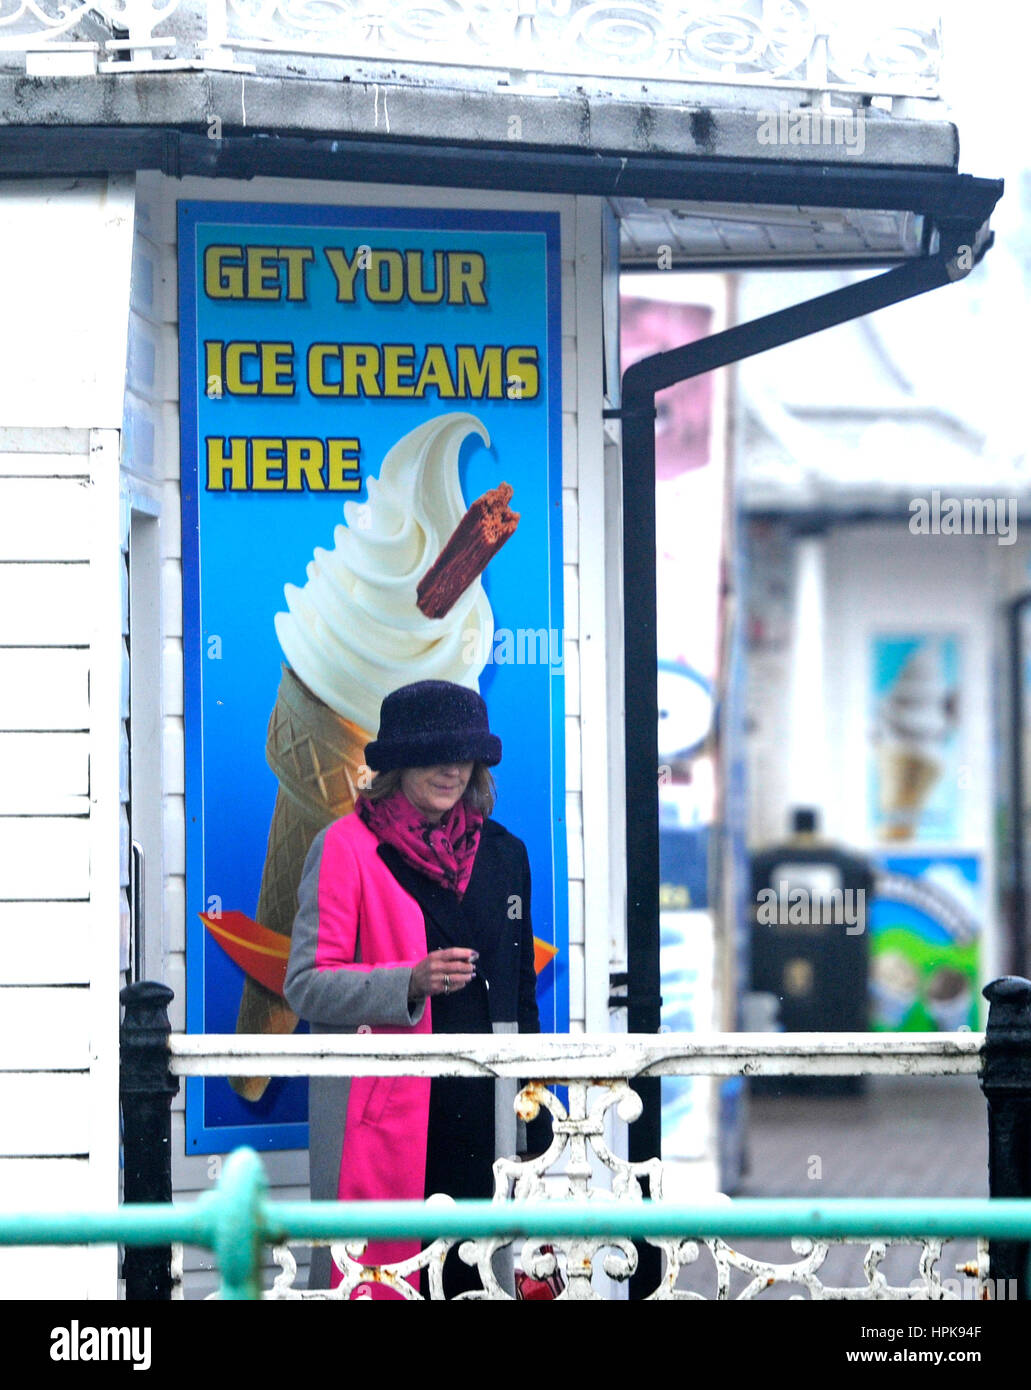 Brighton, UK. 23rd Feb, 2017. A woman shelters from the wind and rain by an ice cream kiosk on Brighton seafront this morning as Storm Doris hits the south coast today. Some parts of Britain are forecast to get winds of up to 70mph Credit: Simon Dack/Alamy Live News Credit: Simon Dack/Alamy Live News Stock Photo